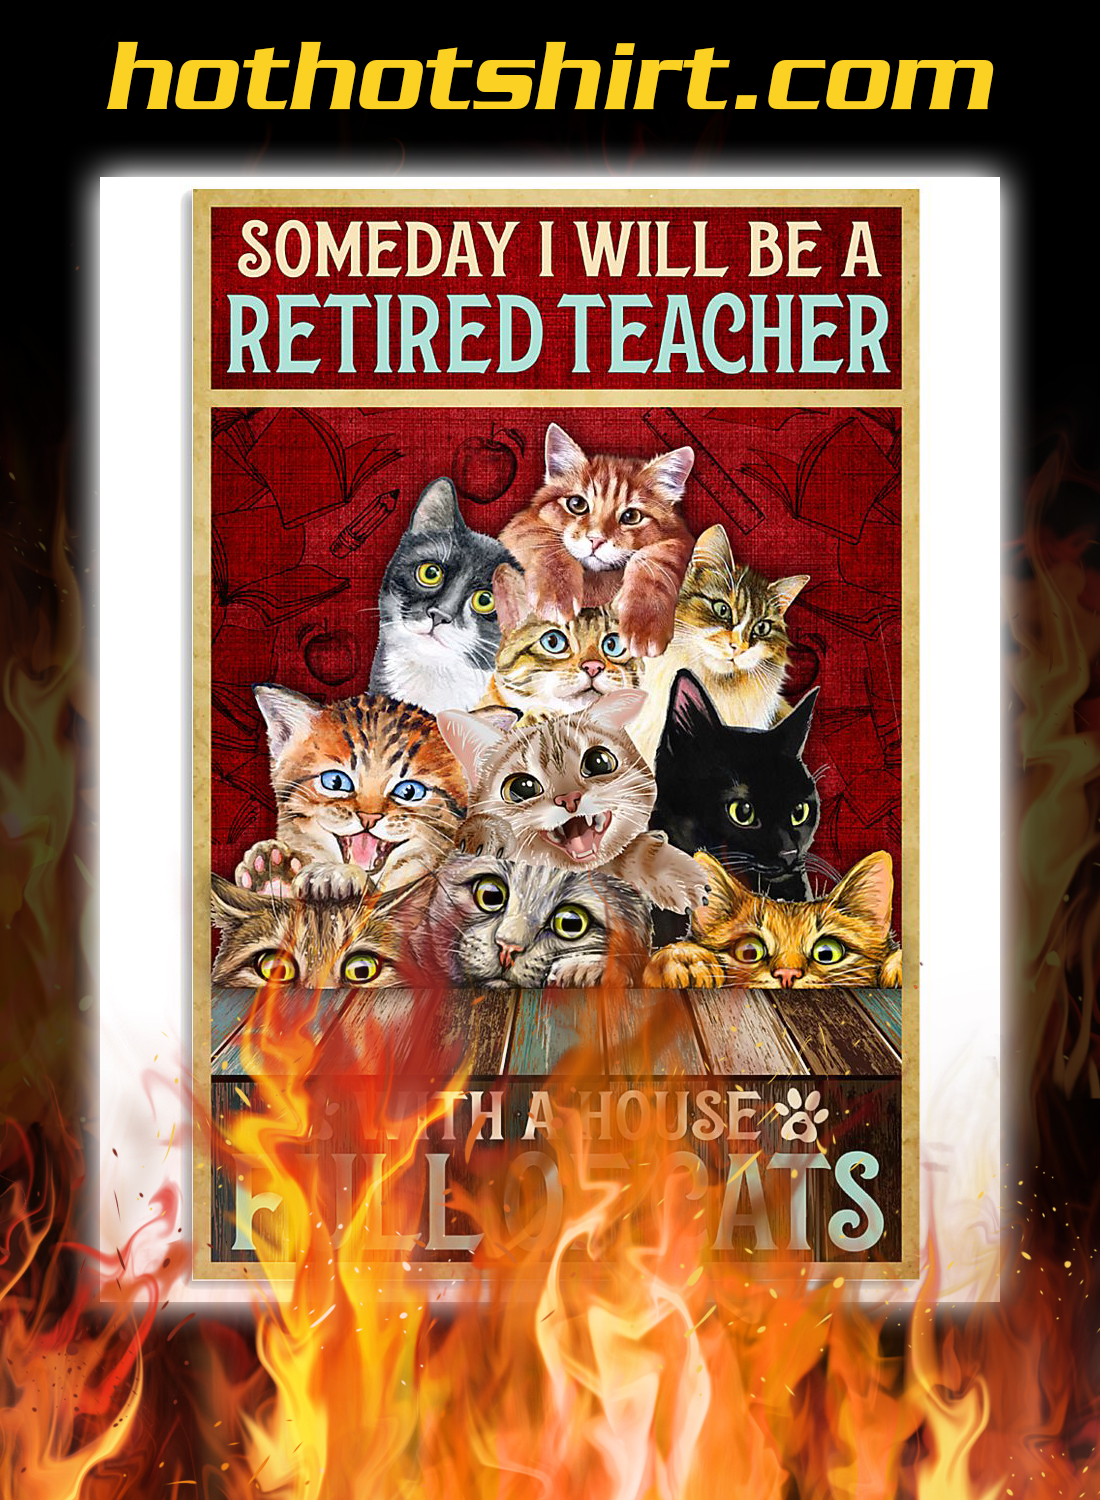 Someday i will be a retired teacher with a house full of cats poster